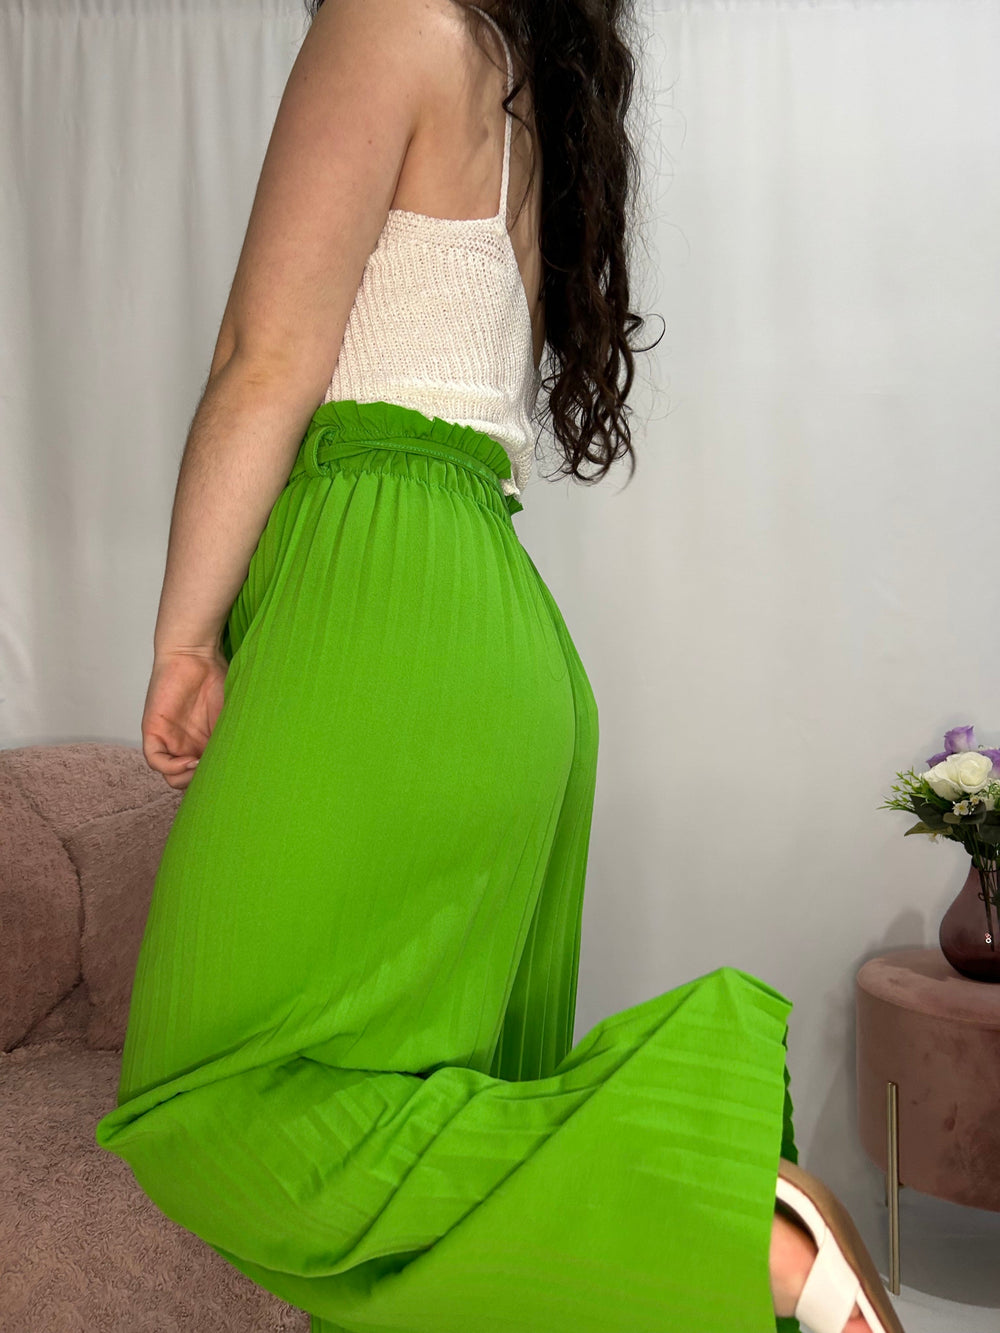 Florence pleated green pants (defective)